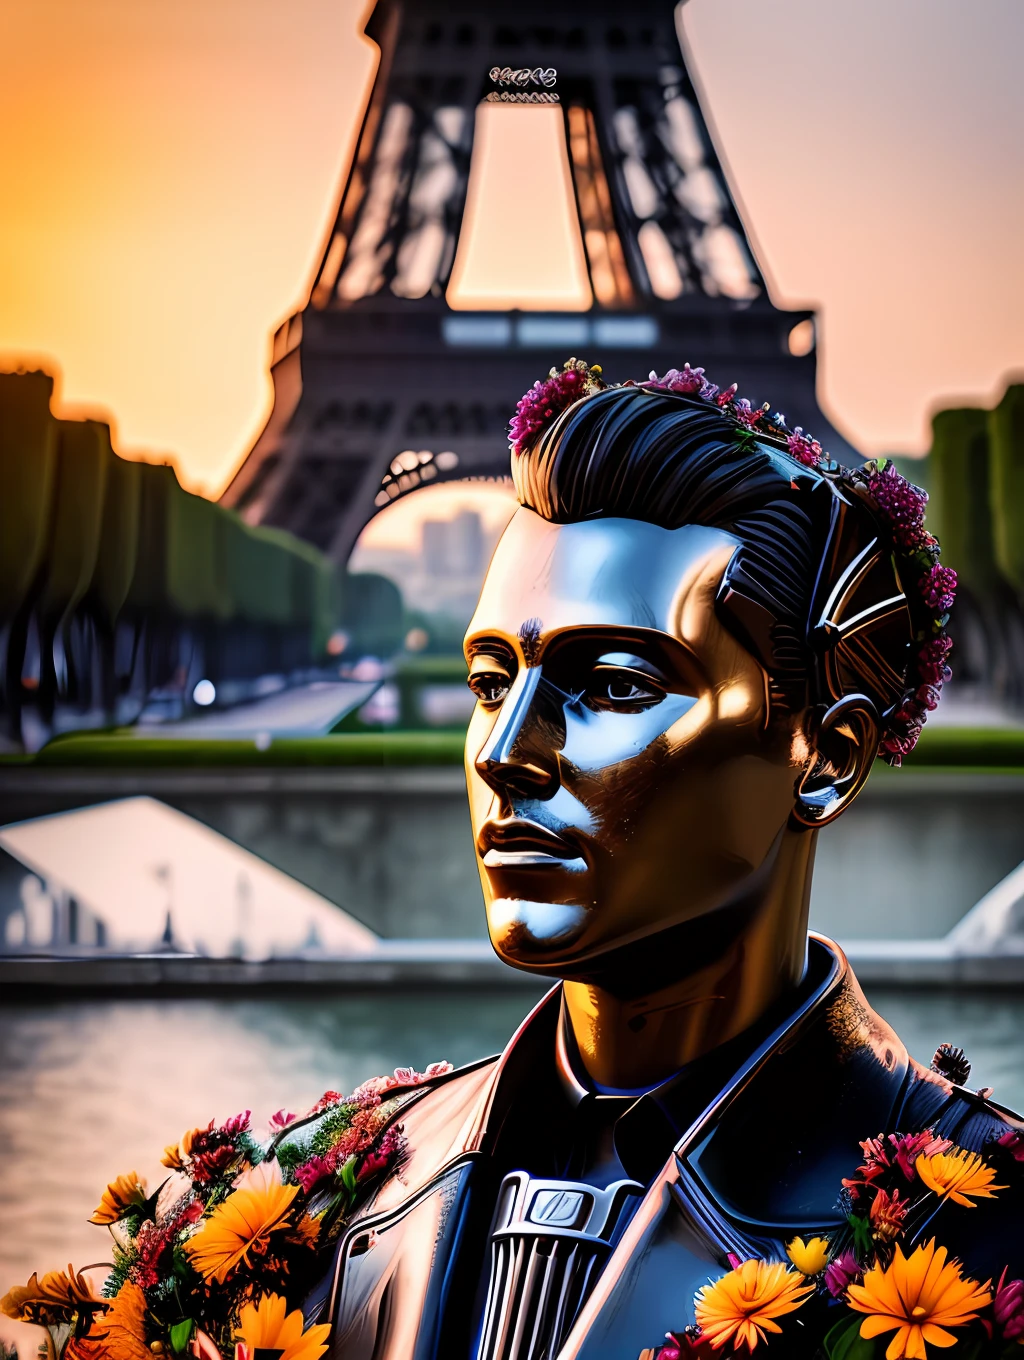 An insanely detailed photorealistic digital art piece portrait of a retro robot holding a bouquet of flowers in front of the Eiffel Tower, photography, realistic, cinematic lighting, sunset, romantic, melancholy, looking at the camera, ultrarealistic.